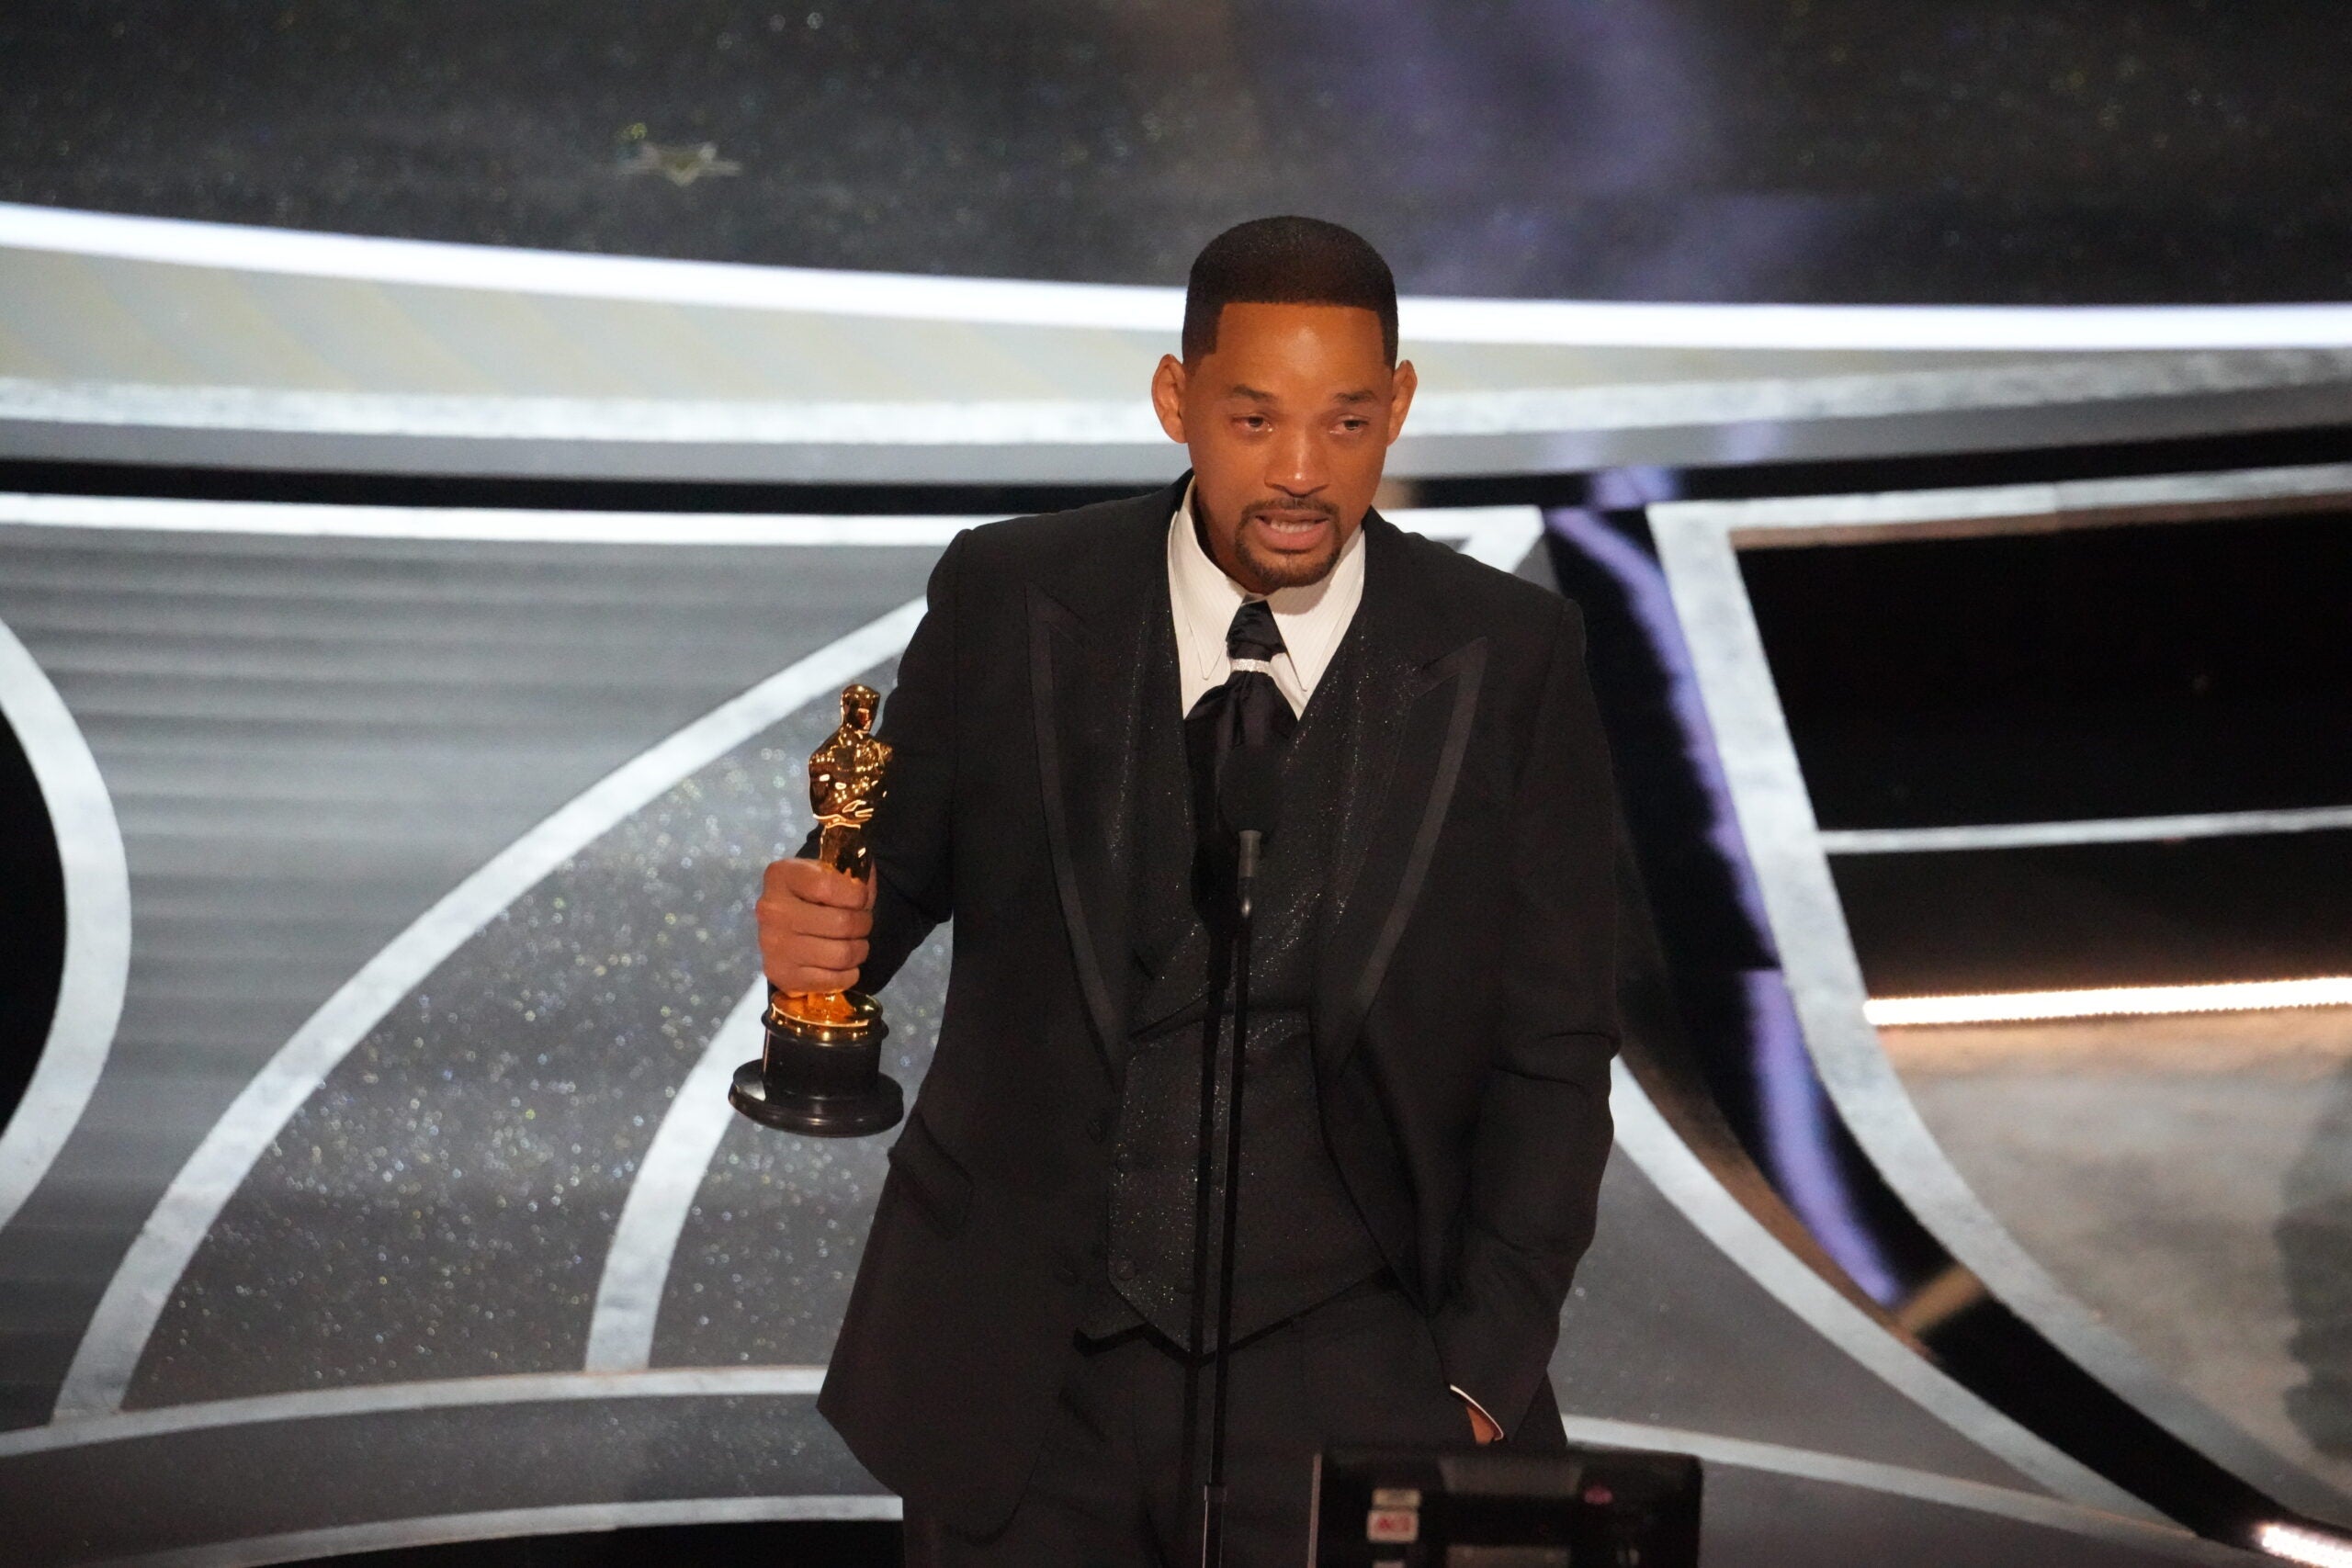 Will Smith accepts the award for best performance by an actor in a leading role for "King Richard" during the 94th Academy Awards at the Dolby Theatre in Los Angeles, on Sunday, March 27, 2022. (Ruth Fremson/The New York Times)